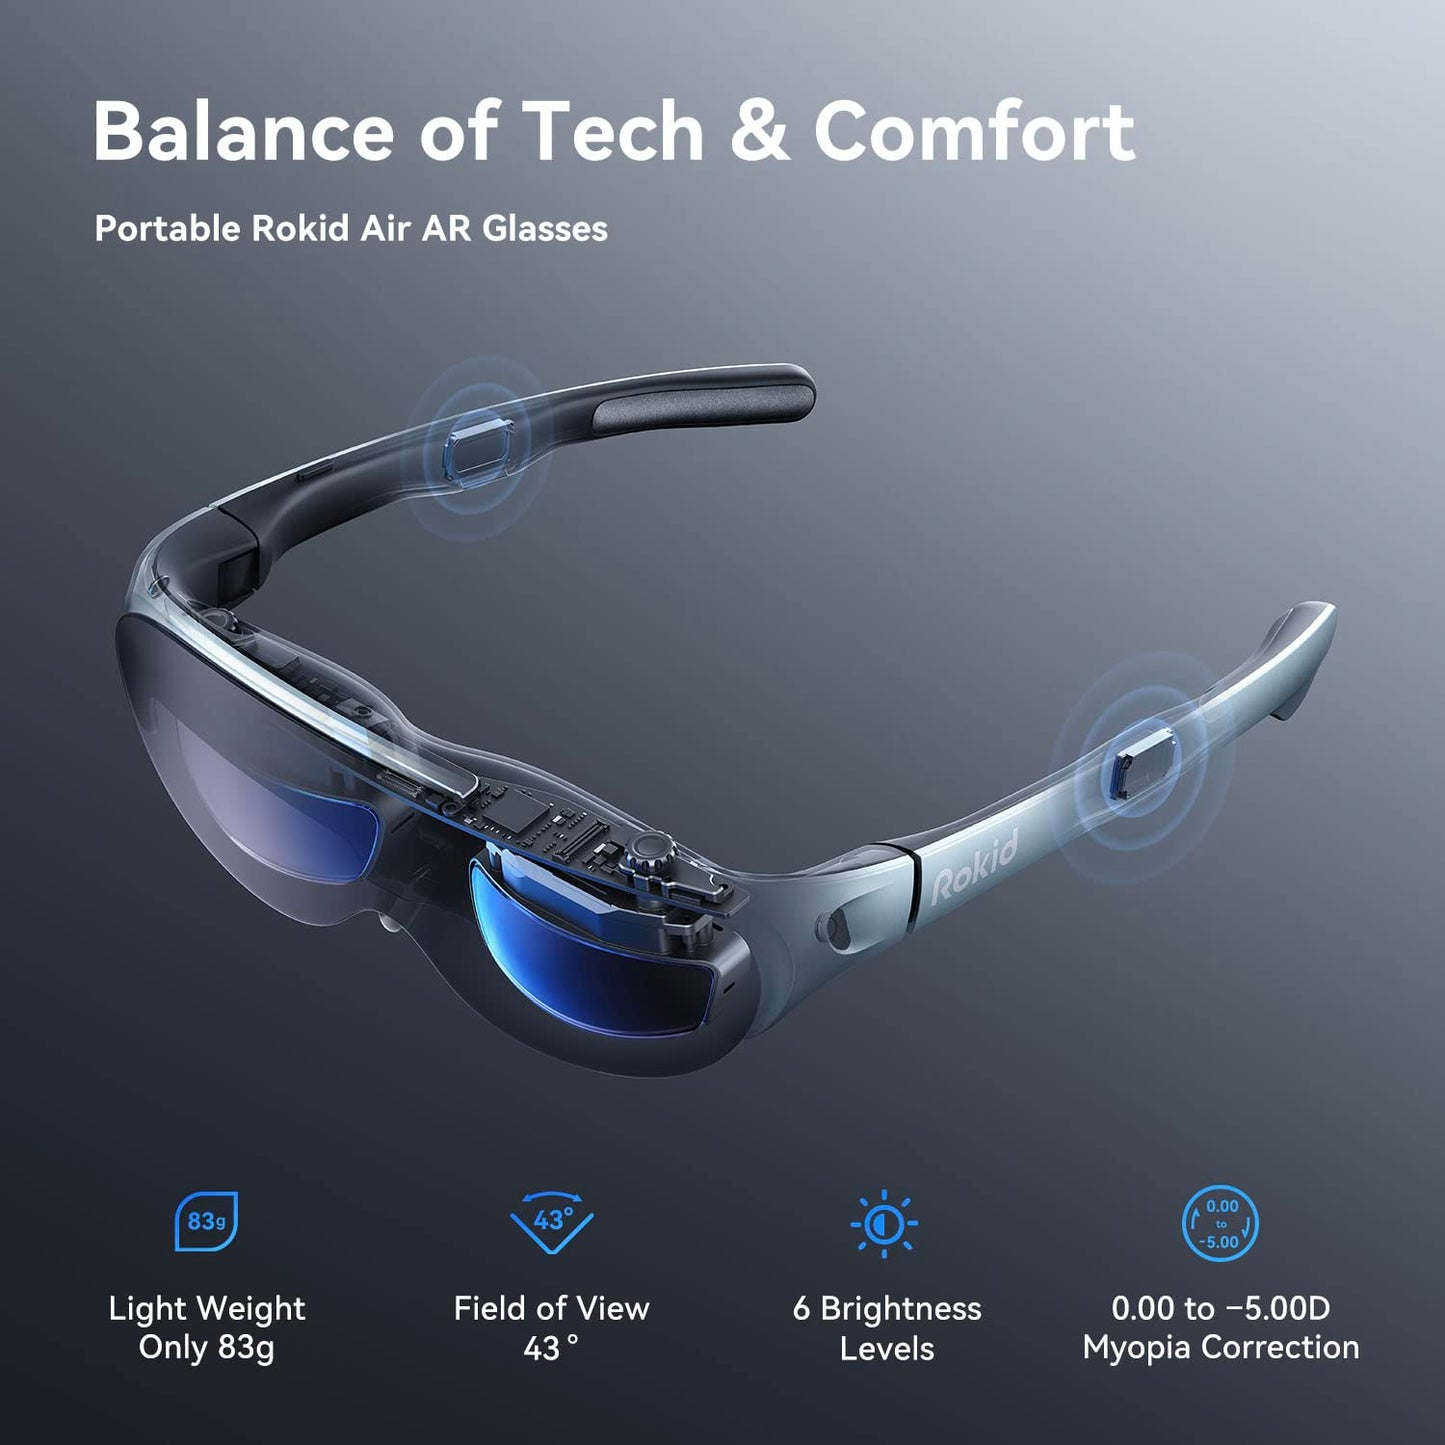 Rokid Air AR Glasses Augmented Reality Wearable Tech Headsets Smart Portable Massive Screen 1080P Dual Display,43°FoV, 55PPD